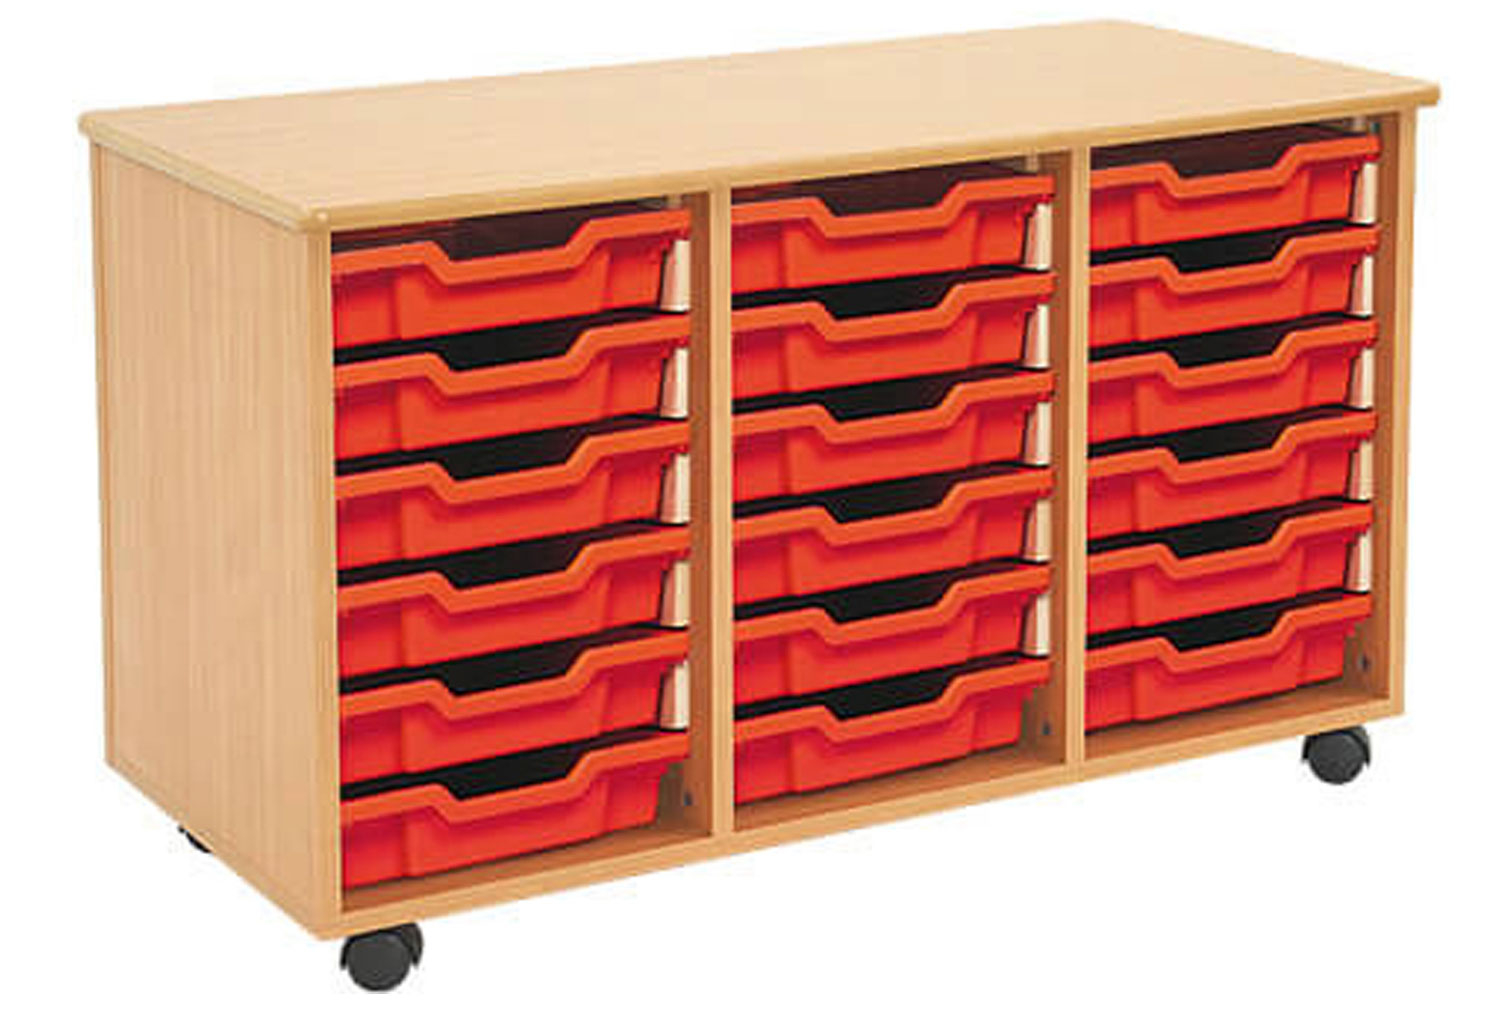 Mobile Tray Classroom Storage Unit With 18 Shallow Gratnells Trays, Red Trays, Express Delivery